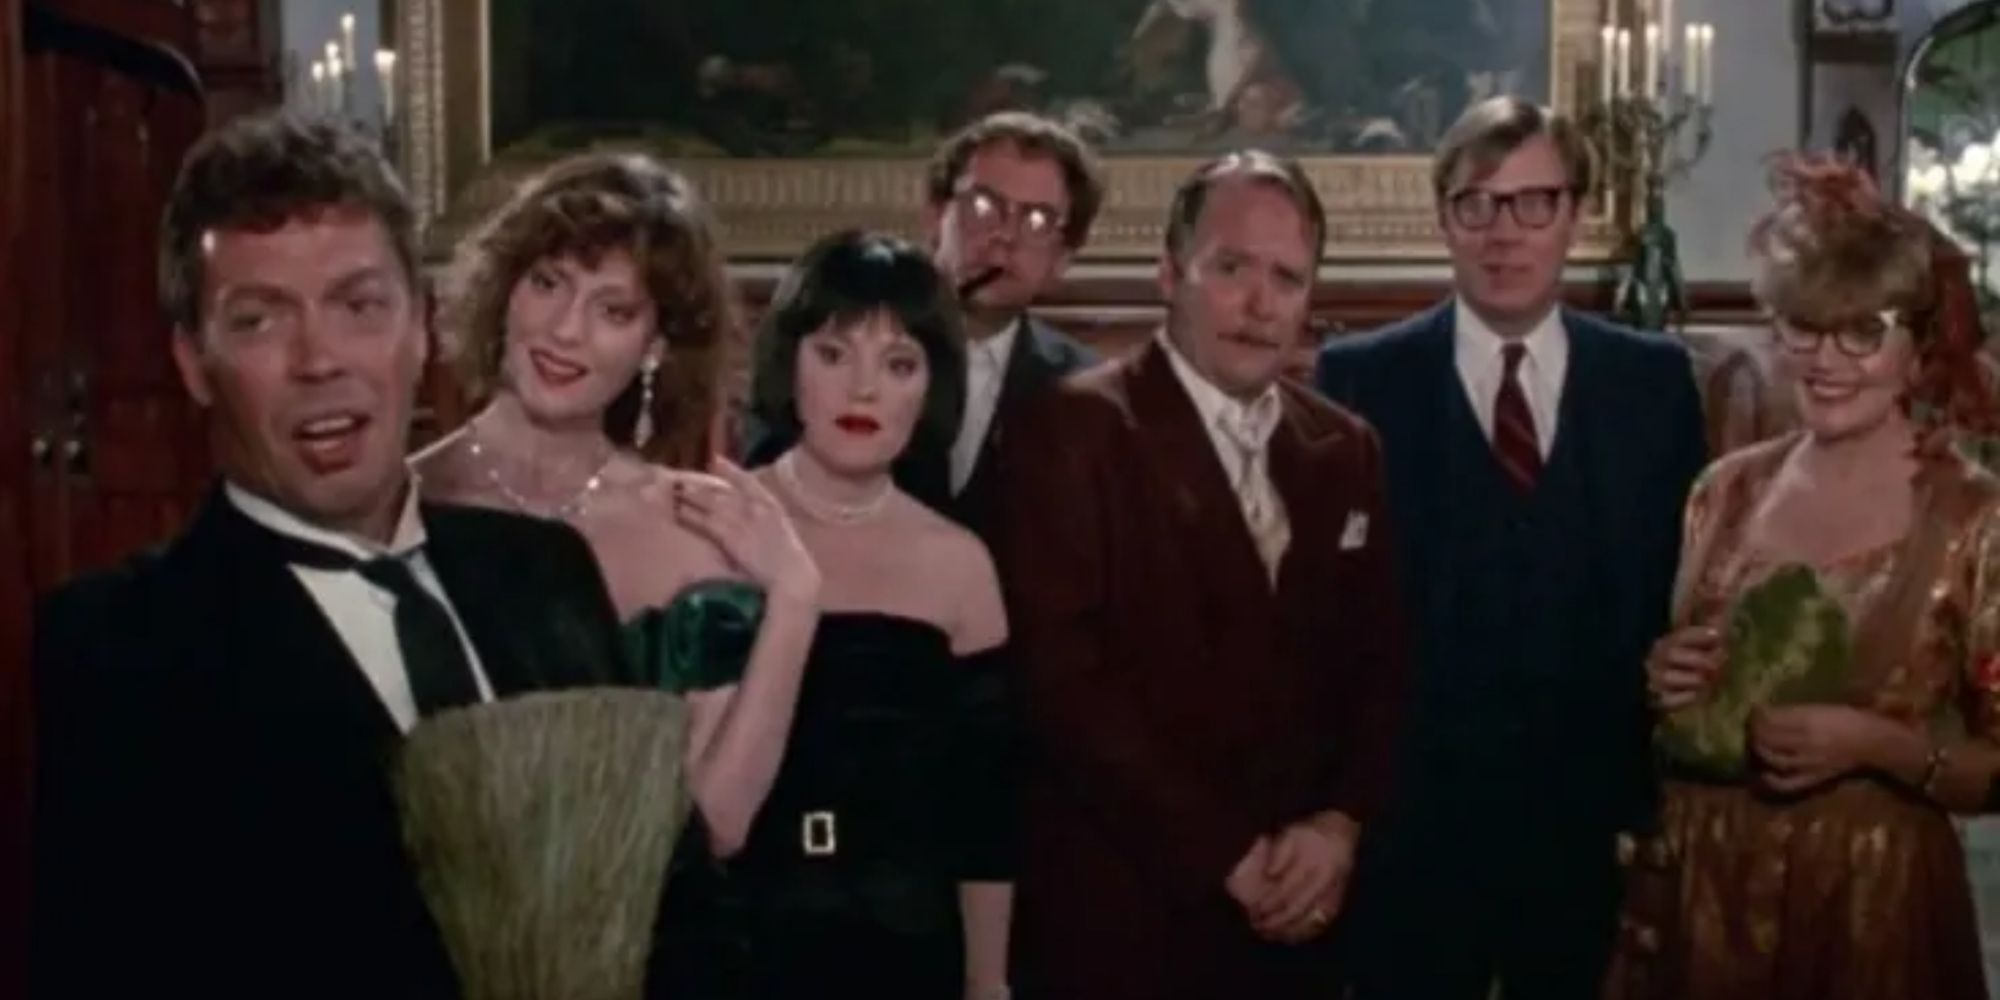 The Cast Of Clue, Assembled In A Parlor